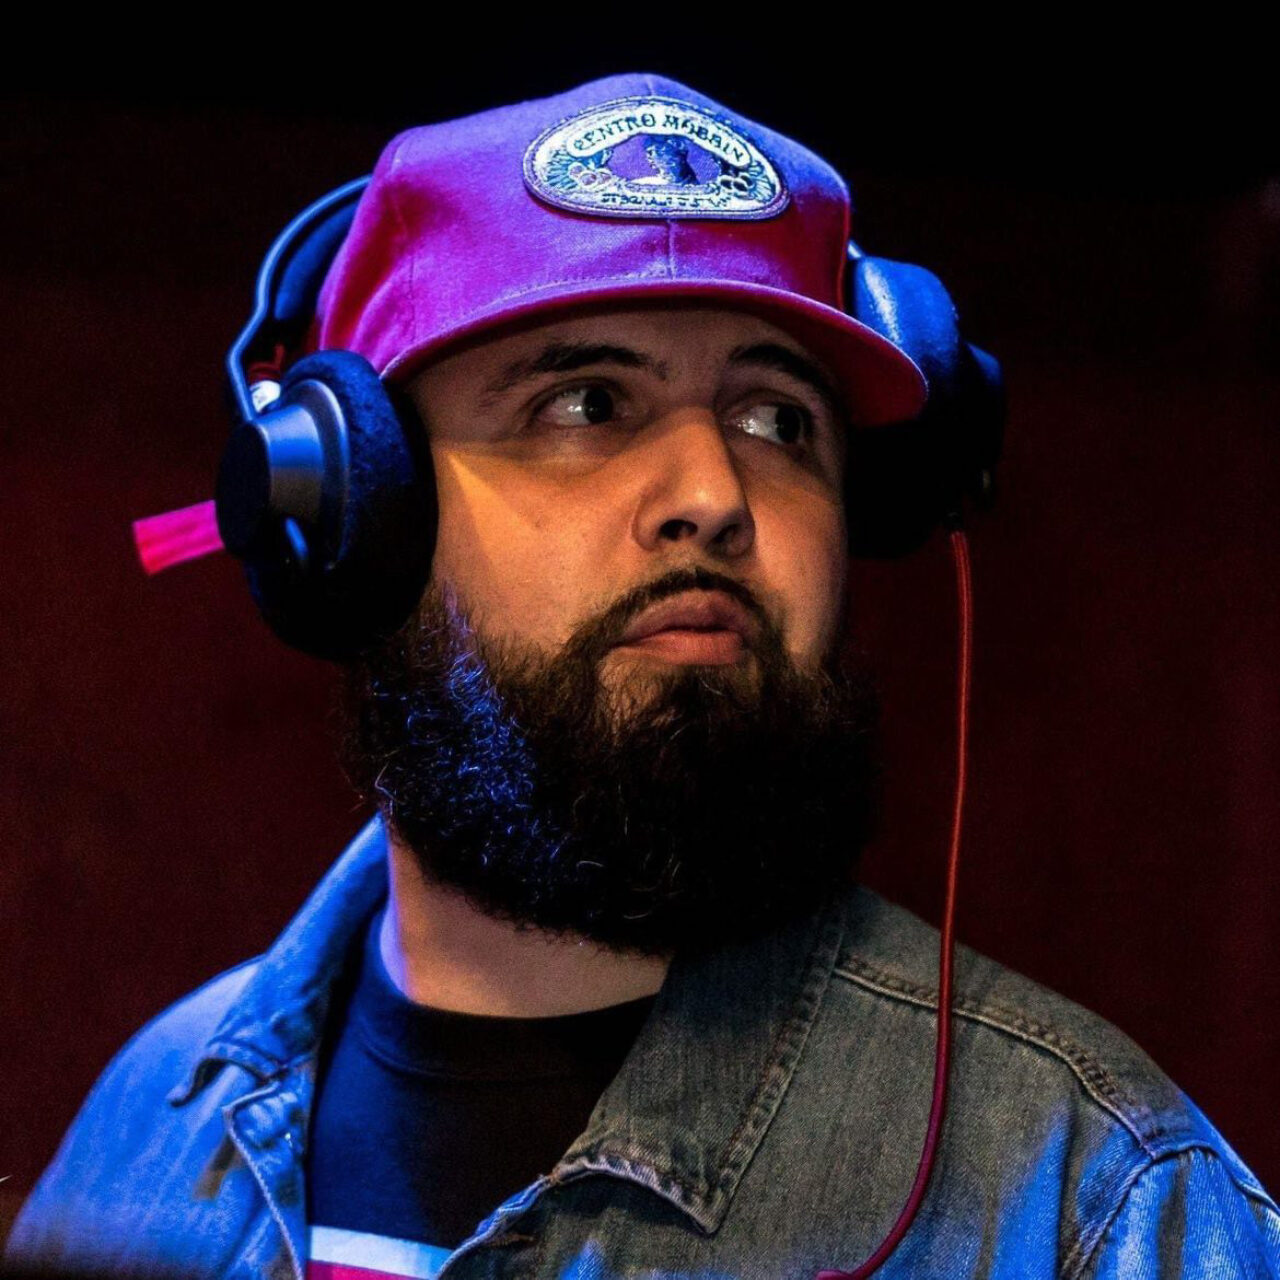 Music in Flor Fina by DJ Wally Rios with his headphones, red baseball cap and beard.